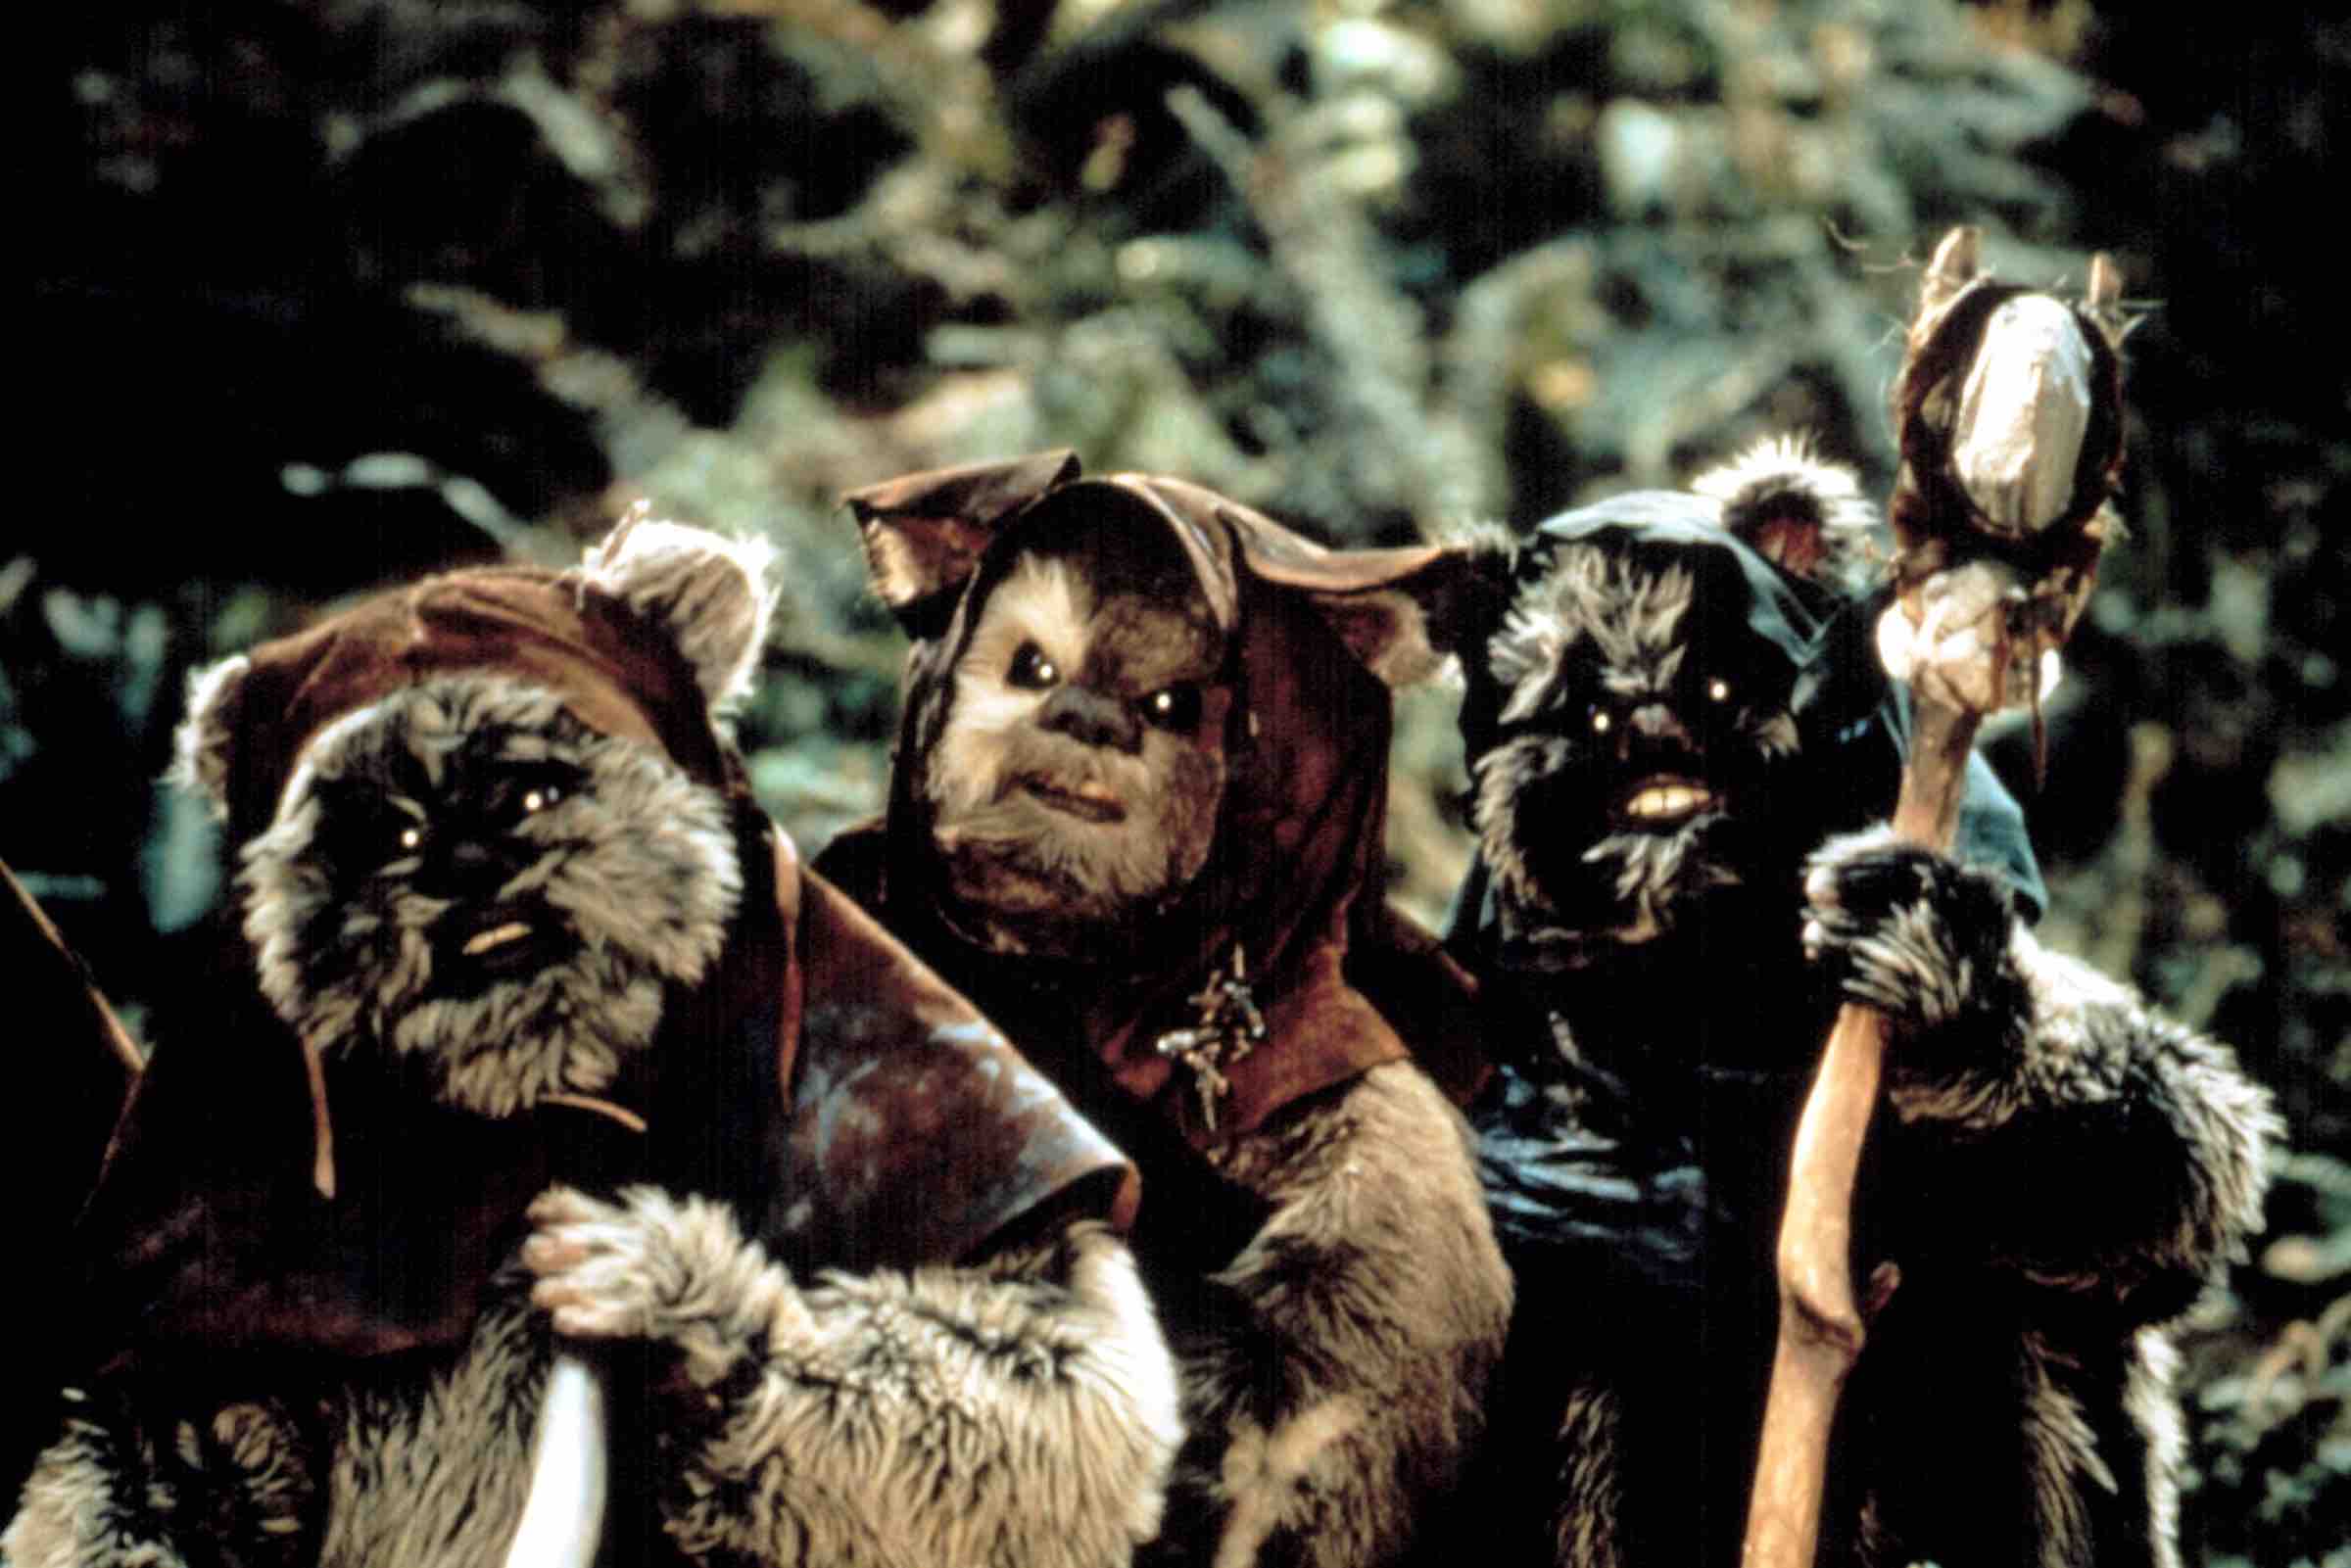 Ewoks are the true powerhouse of 'Star Wars', and they excel in 'Star Wars: The Rise of Skywalker'. Here are the best Ewok moments from the film series.